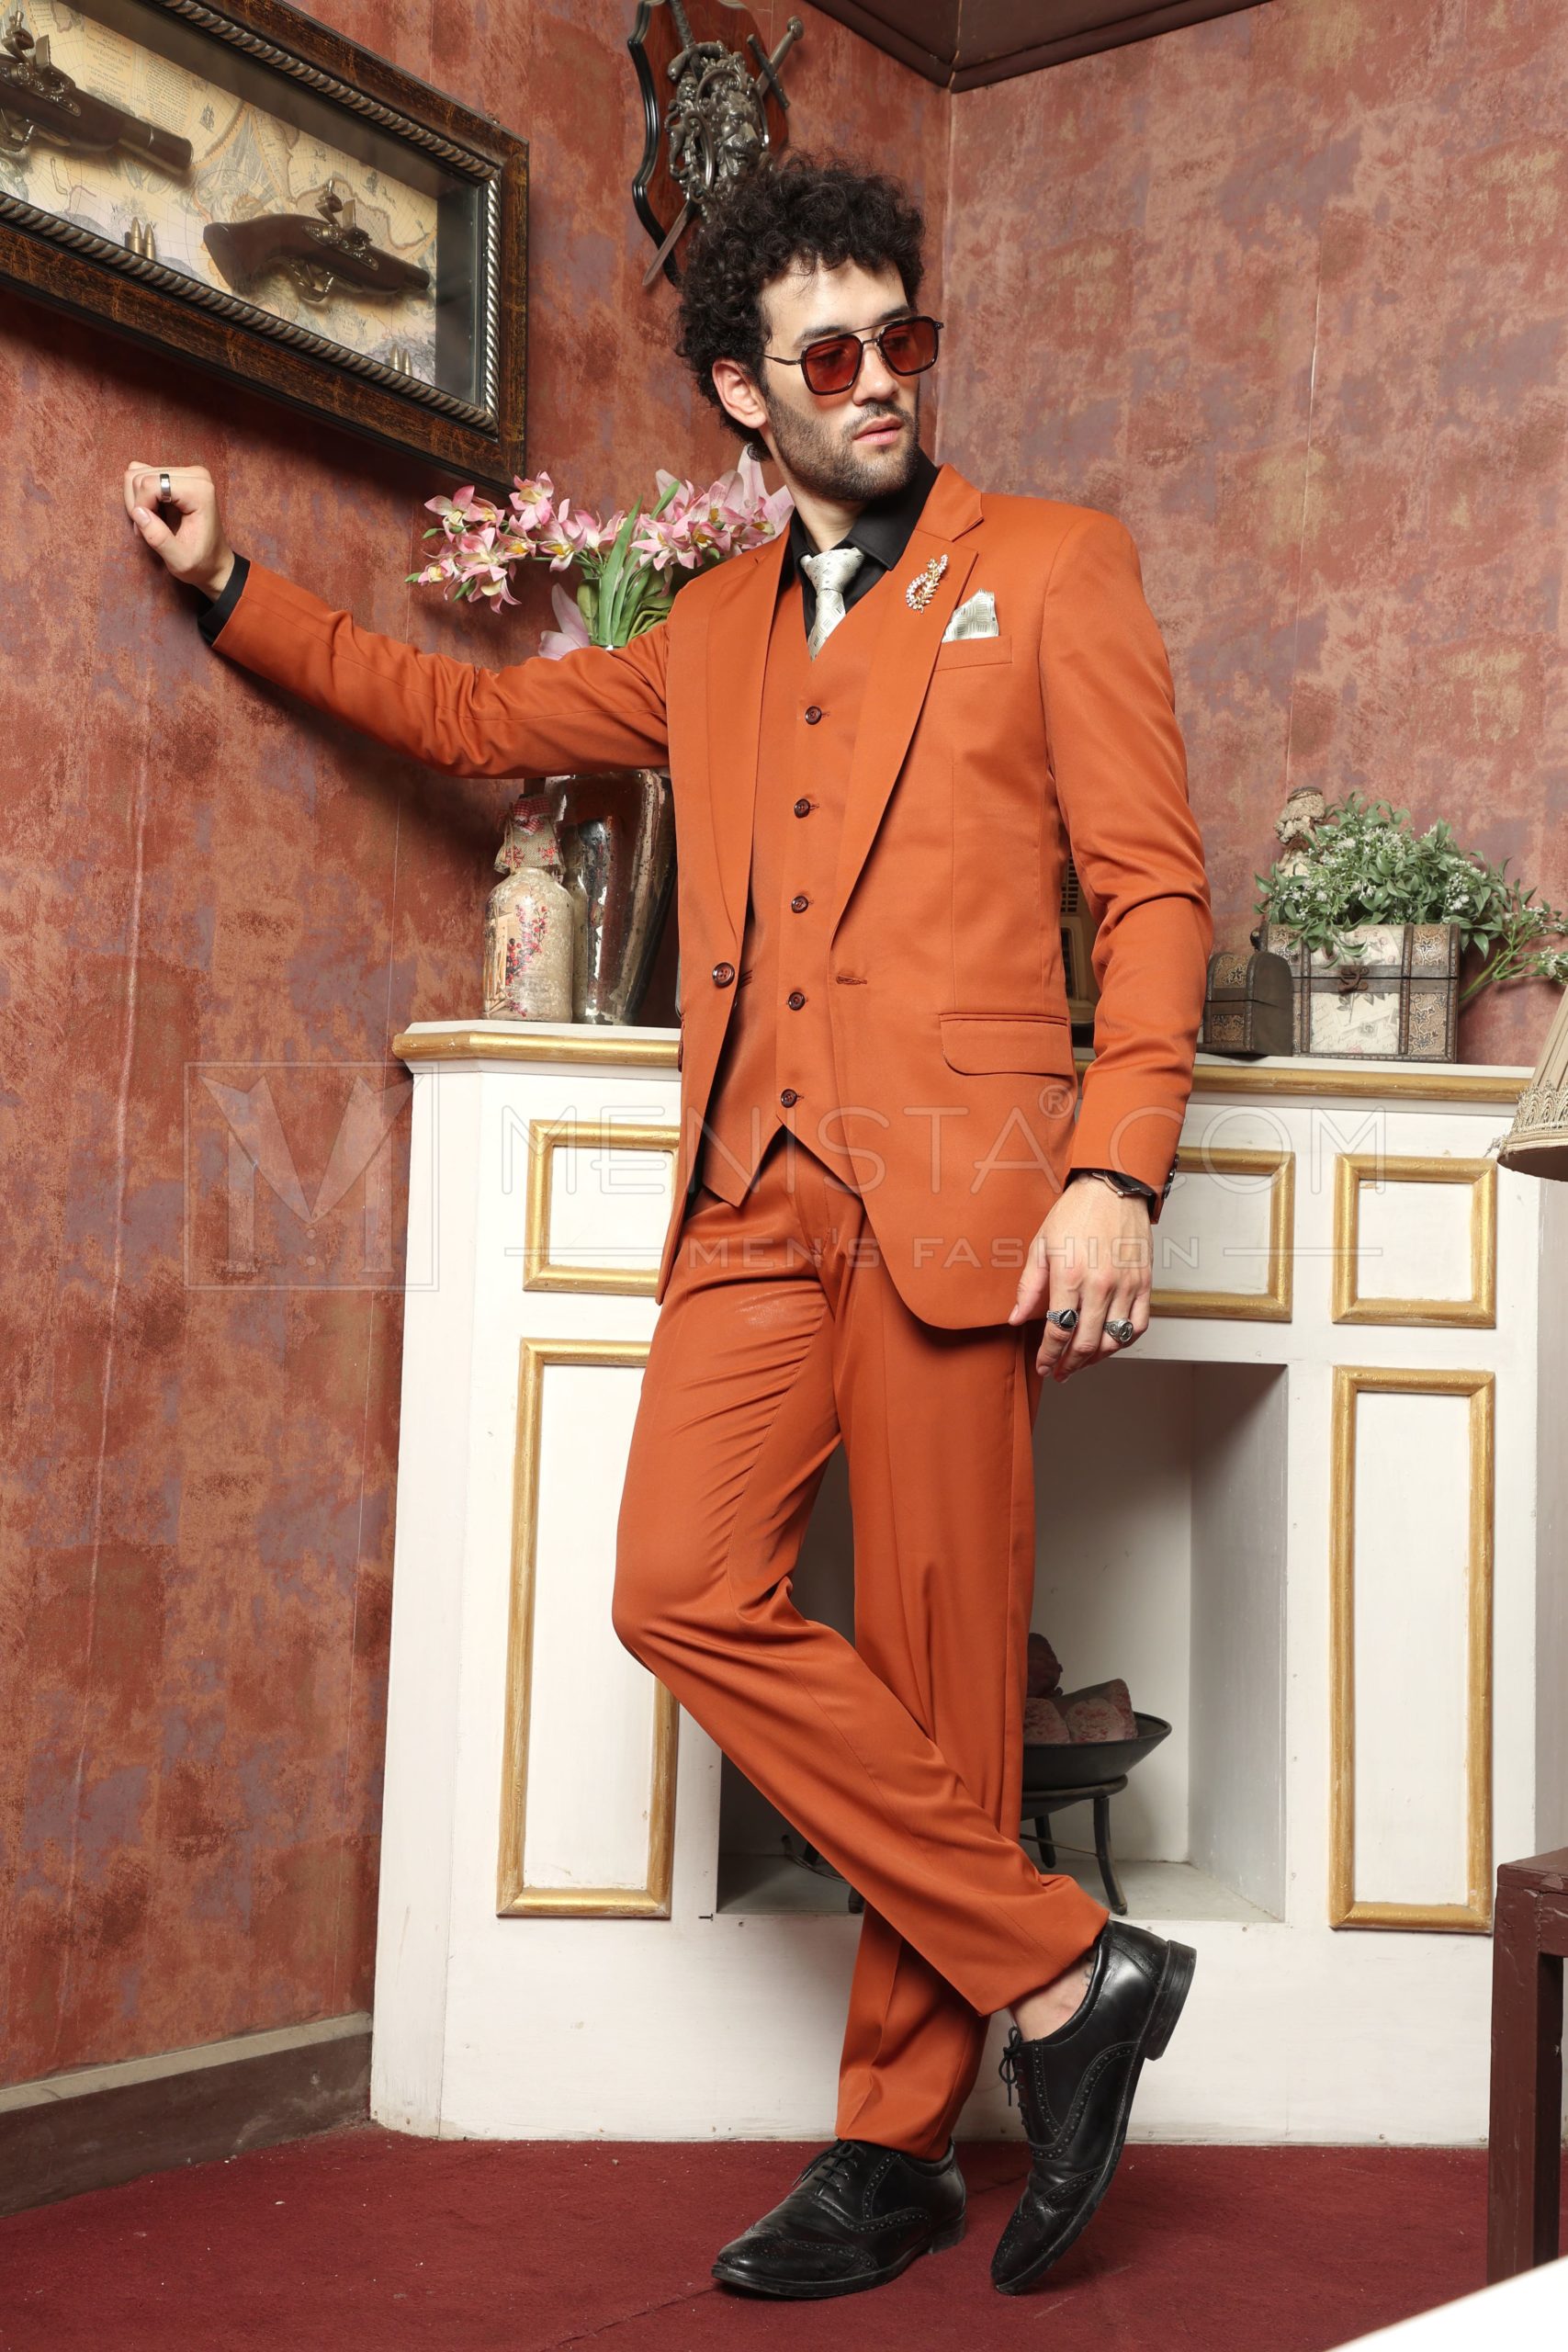 Discover more than 165 exclusive mens wedding suits super hot